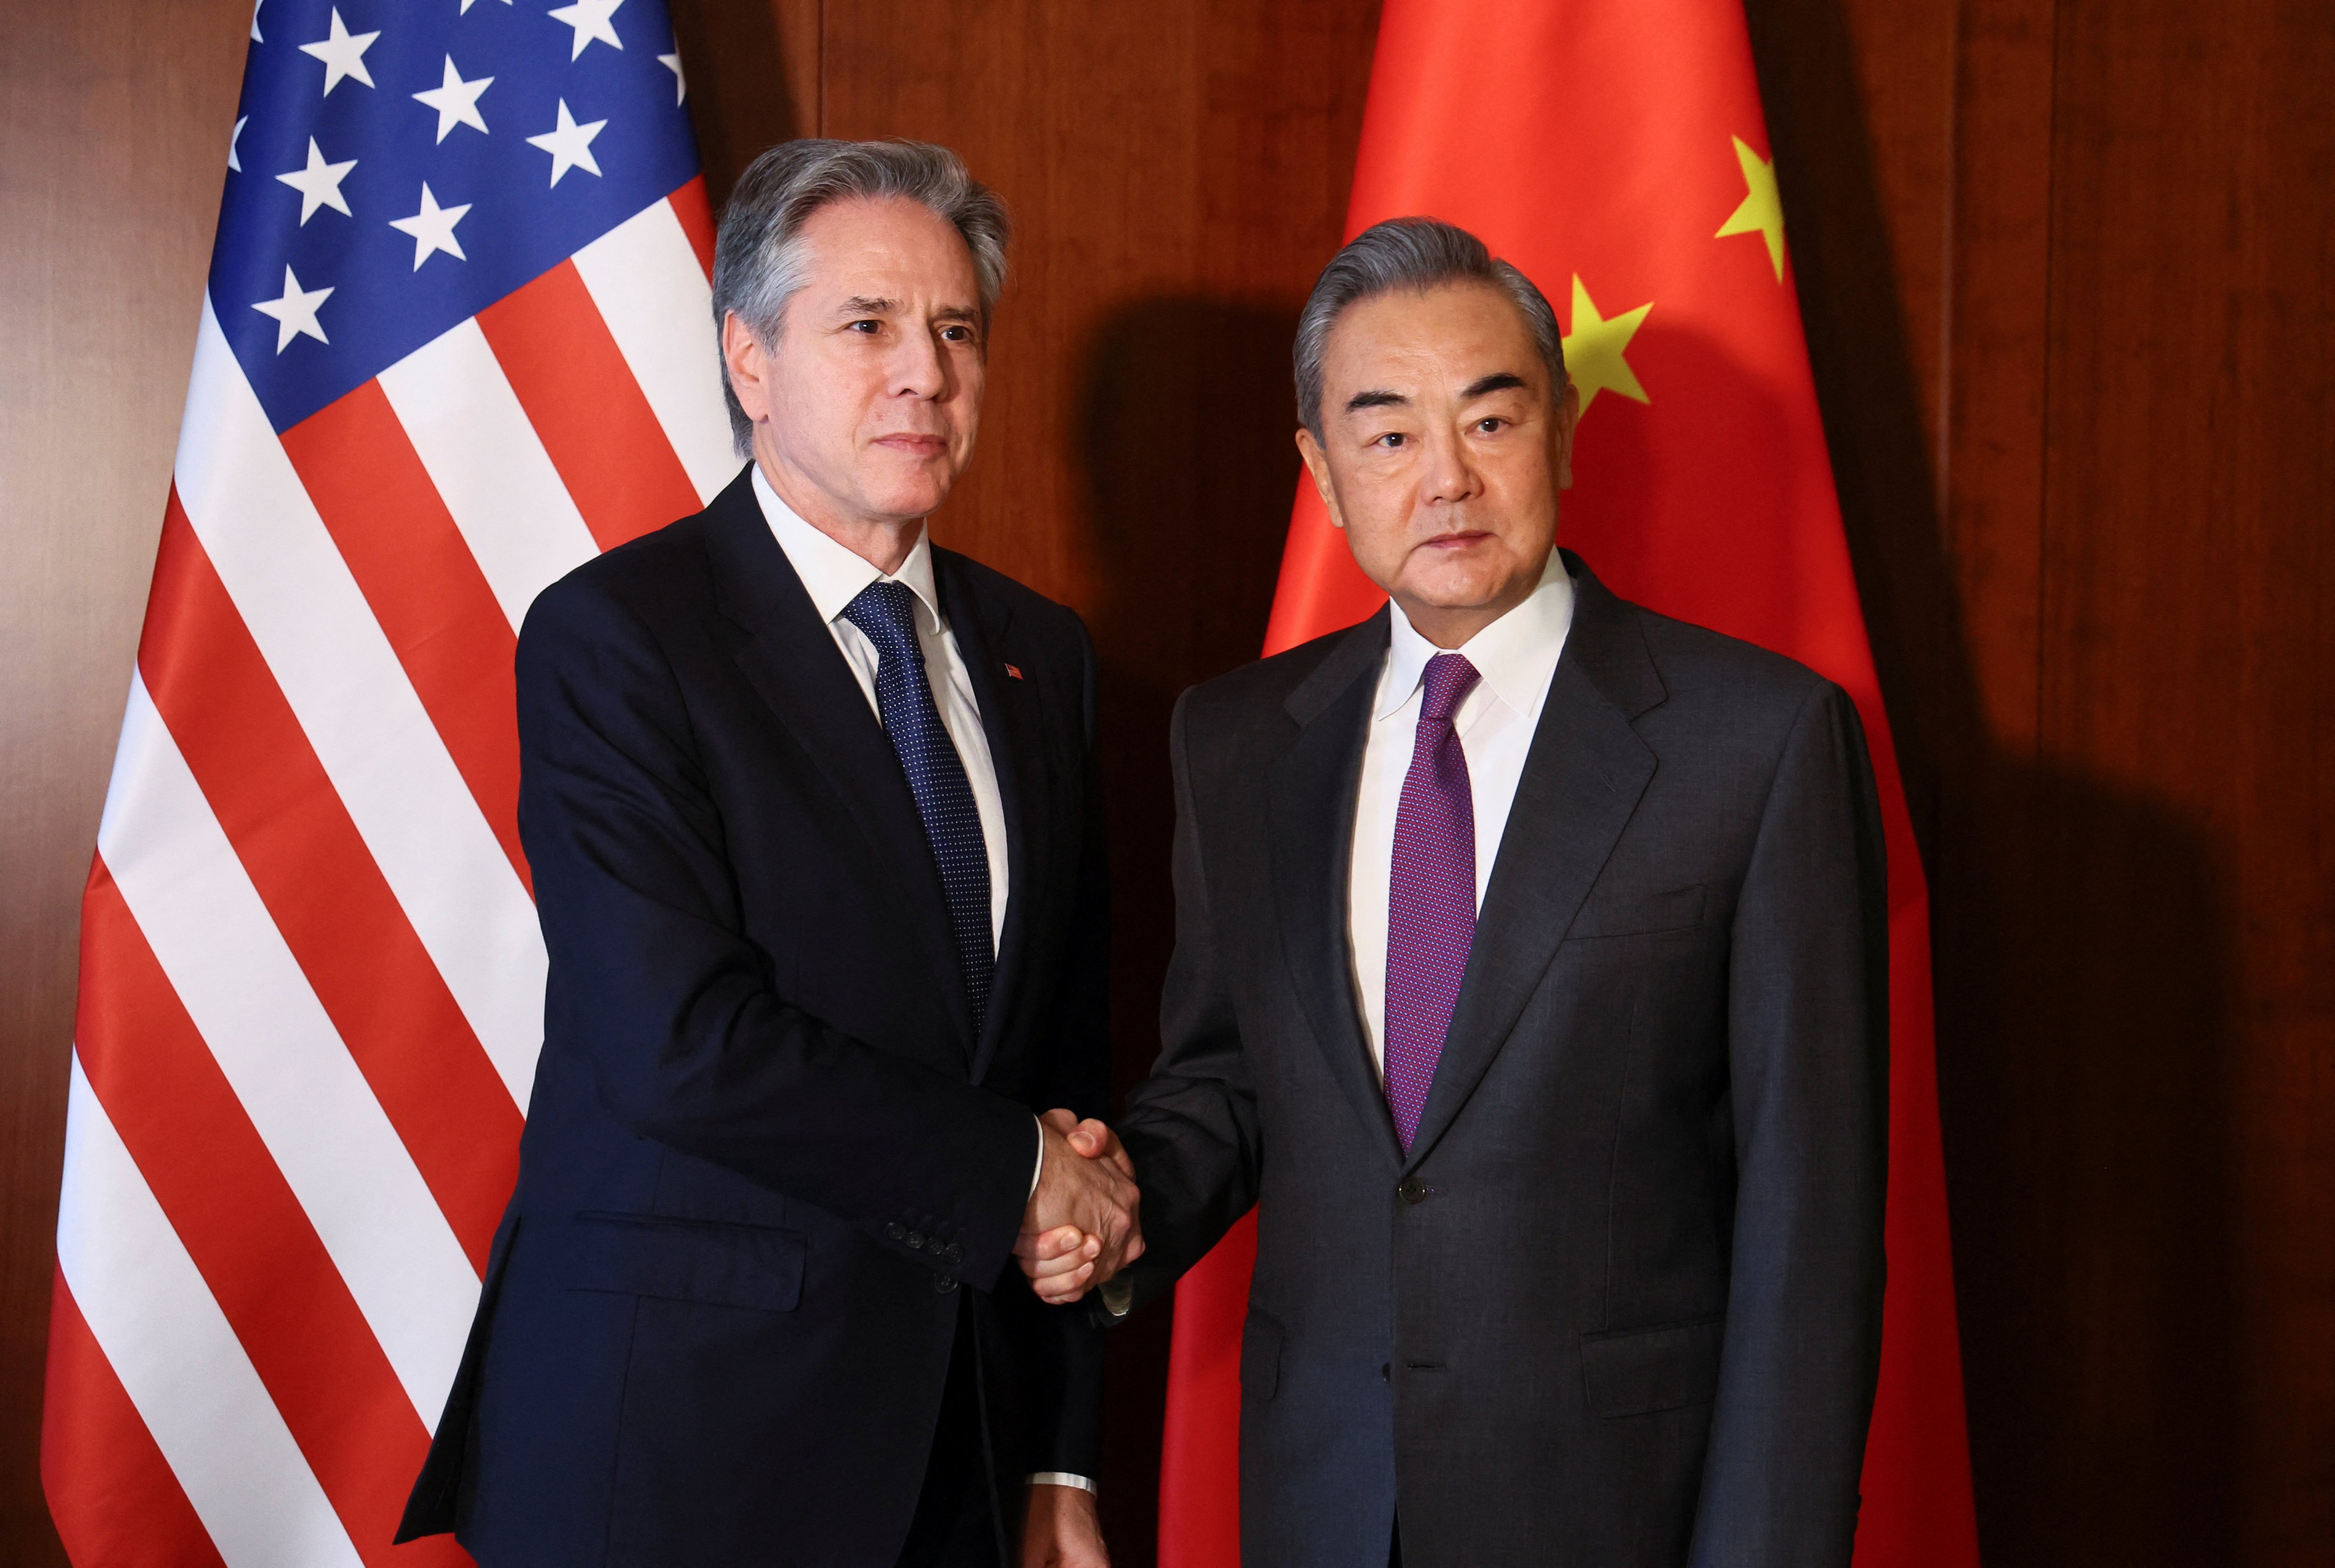 US Secretary of State Antony Blinken met Chinese Foreign Minister Wang Yi on February 16 during the Munich Security Conference. Photo: Reuters